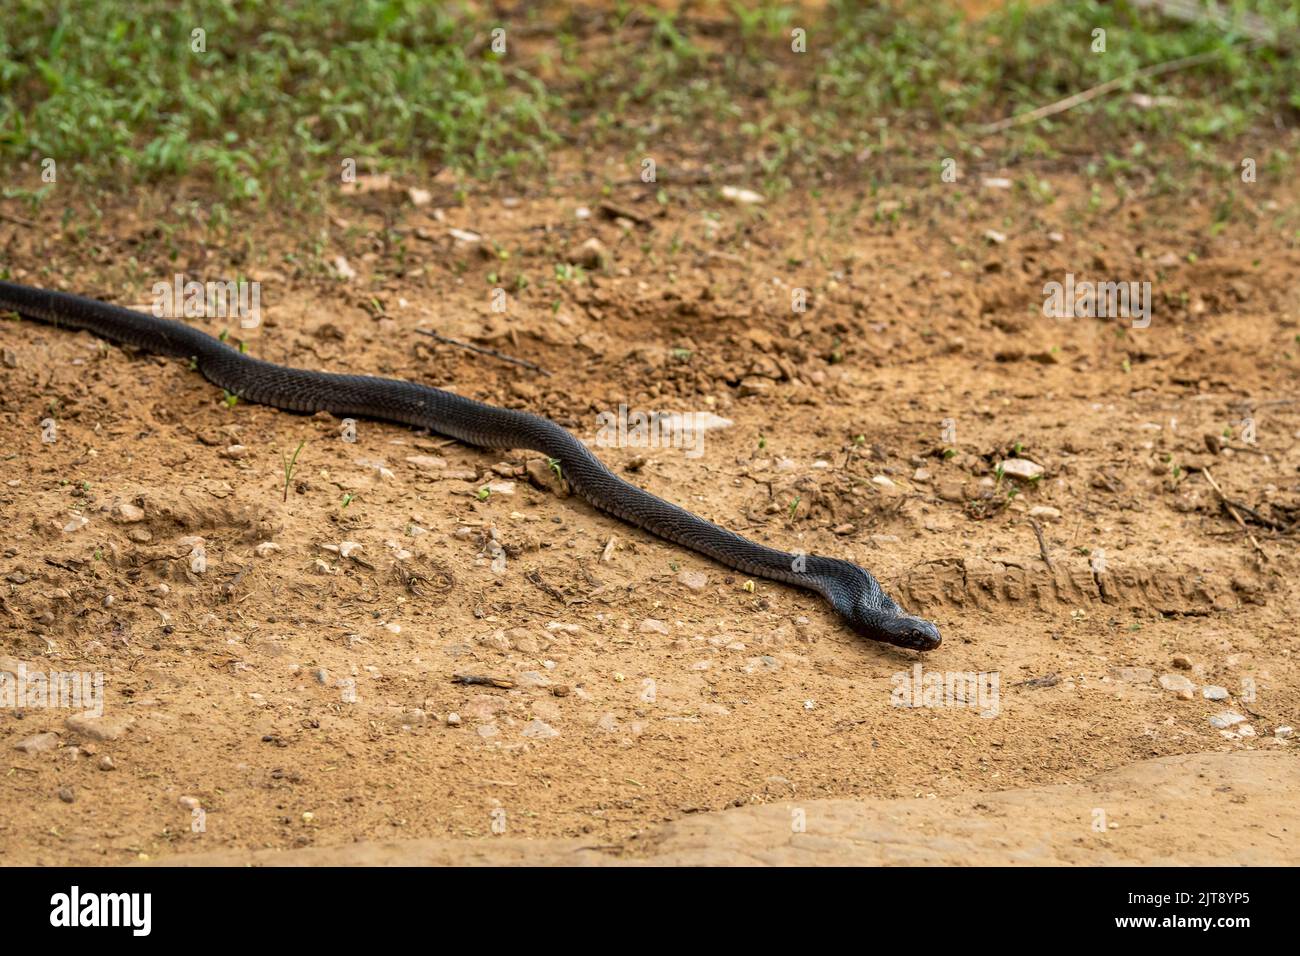 full length Indian cobra or Naja naja or spectacled cobra or Asian cobra a venomous snake serpent with tongue out at forest of central india Stock Photo